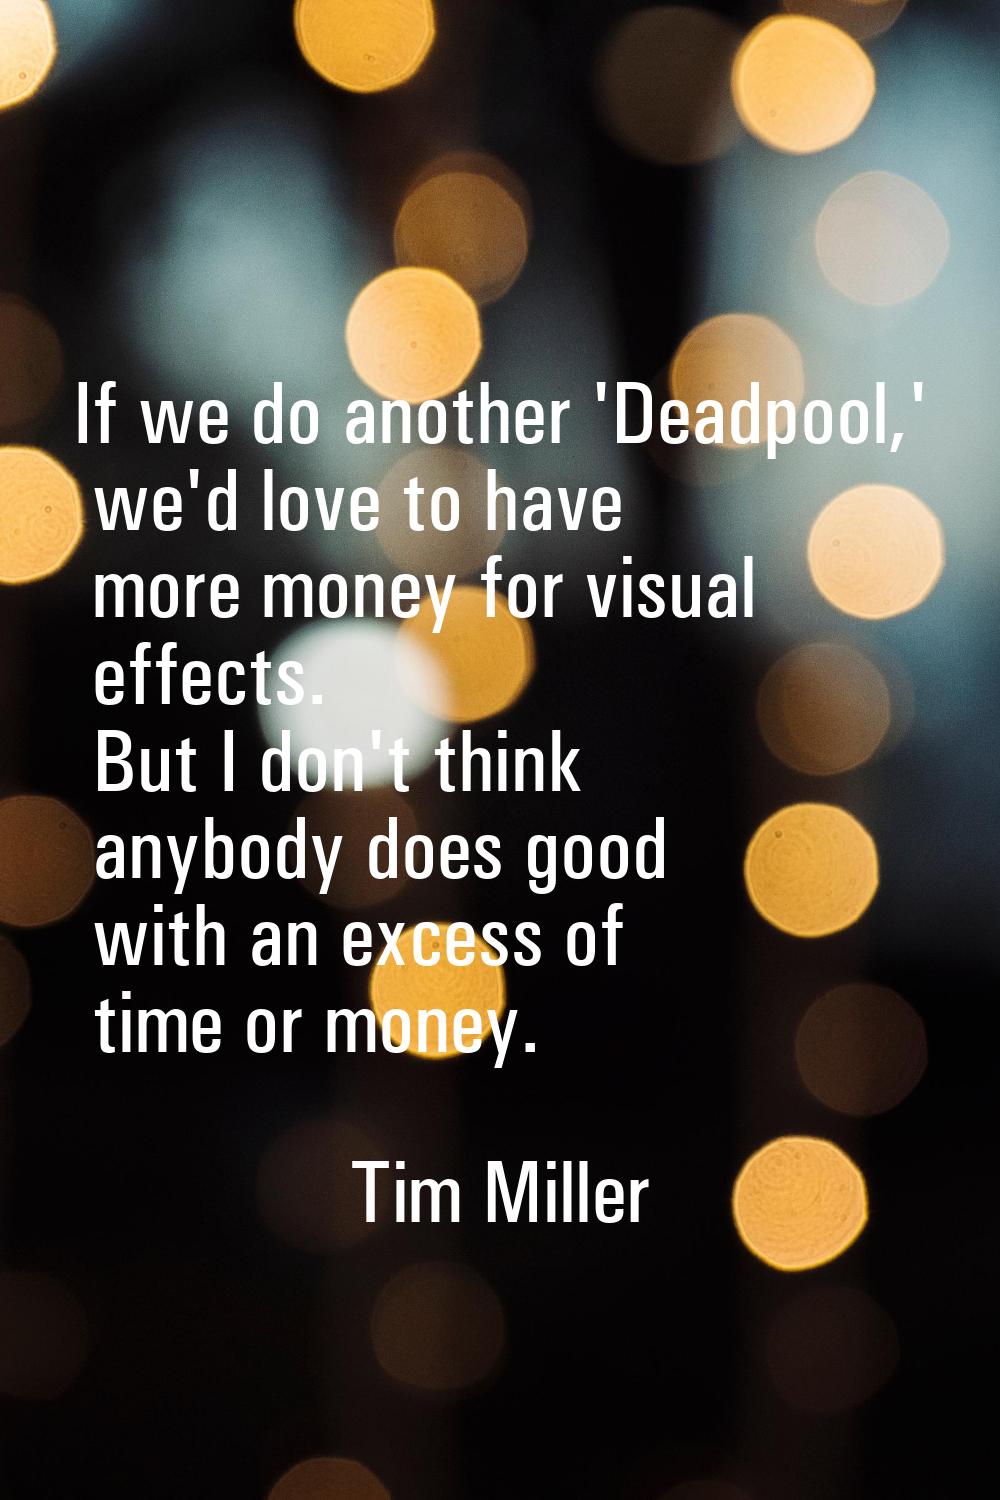 If we do another 'Deadpool,' we'd love to have more money for visual effects. But I don't think any